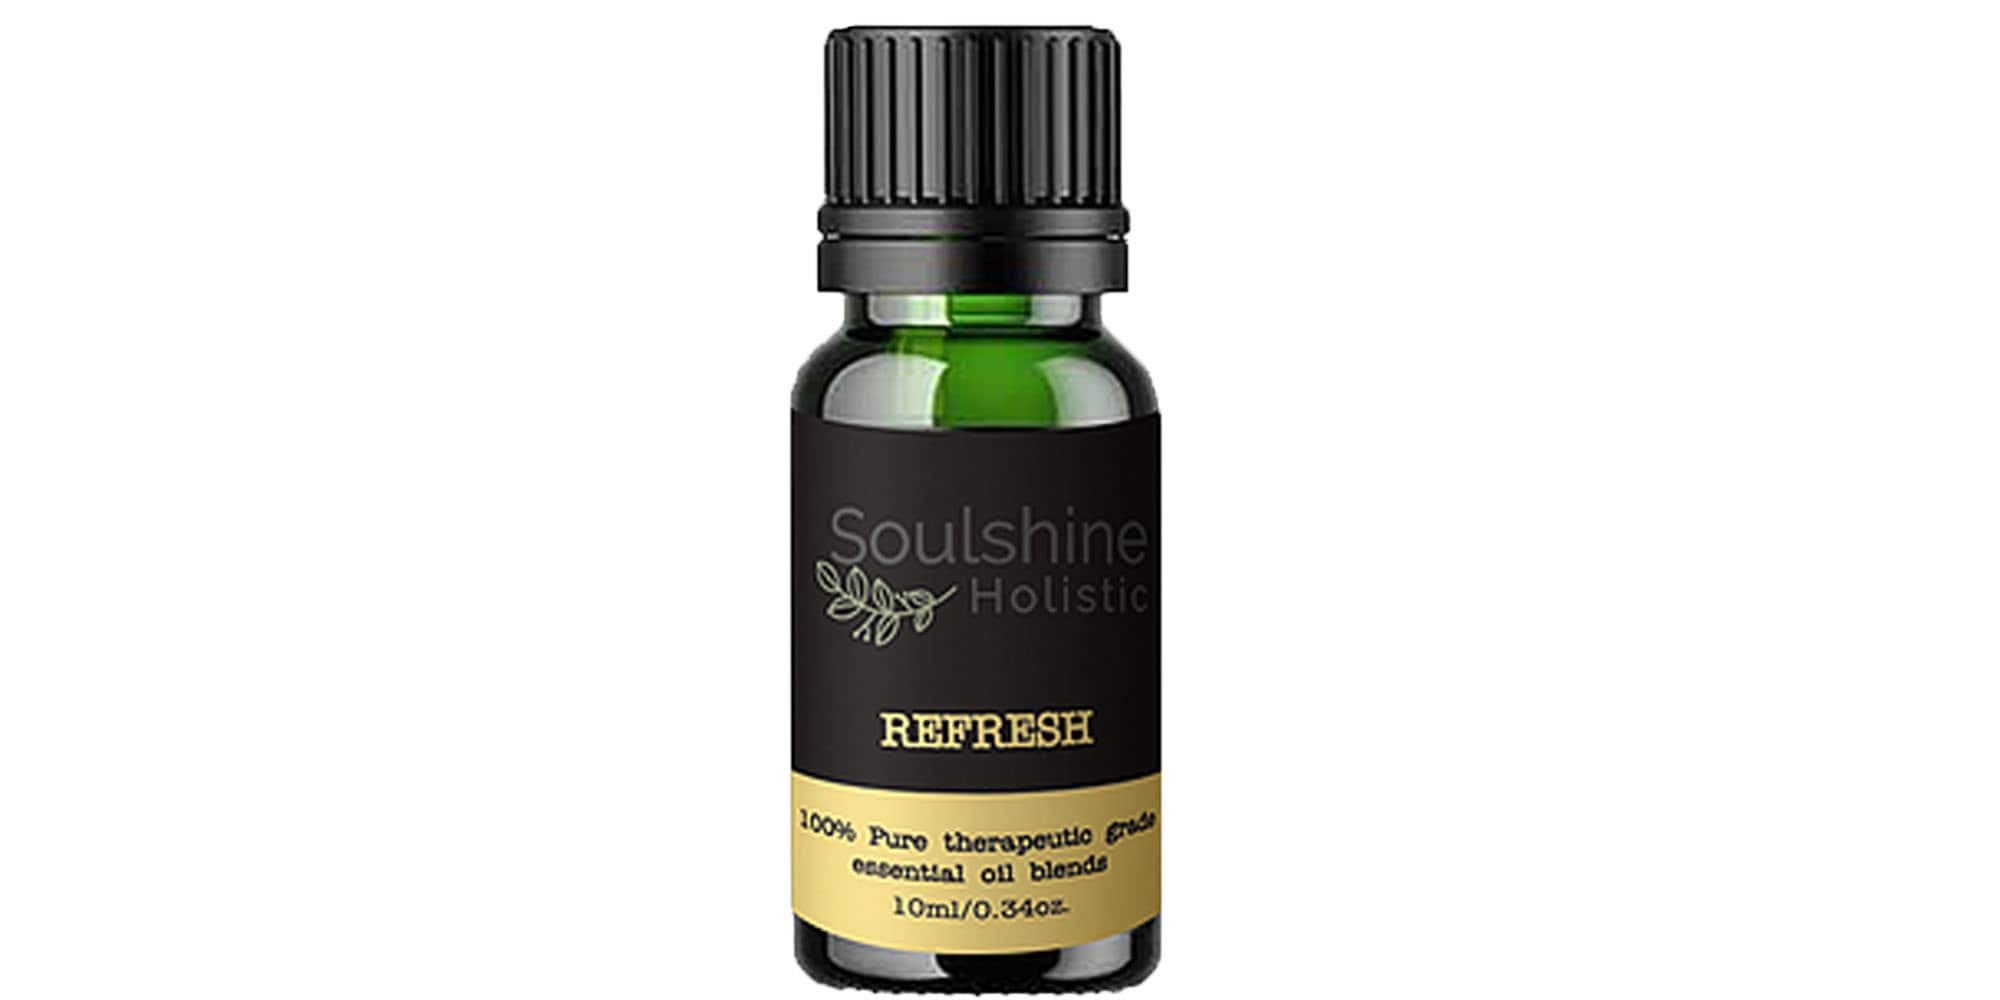 Refresh Essential Oils Blend, 100% Pure Therapeutic Grade Only, Refresh Oil, Diffuser Blends